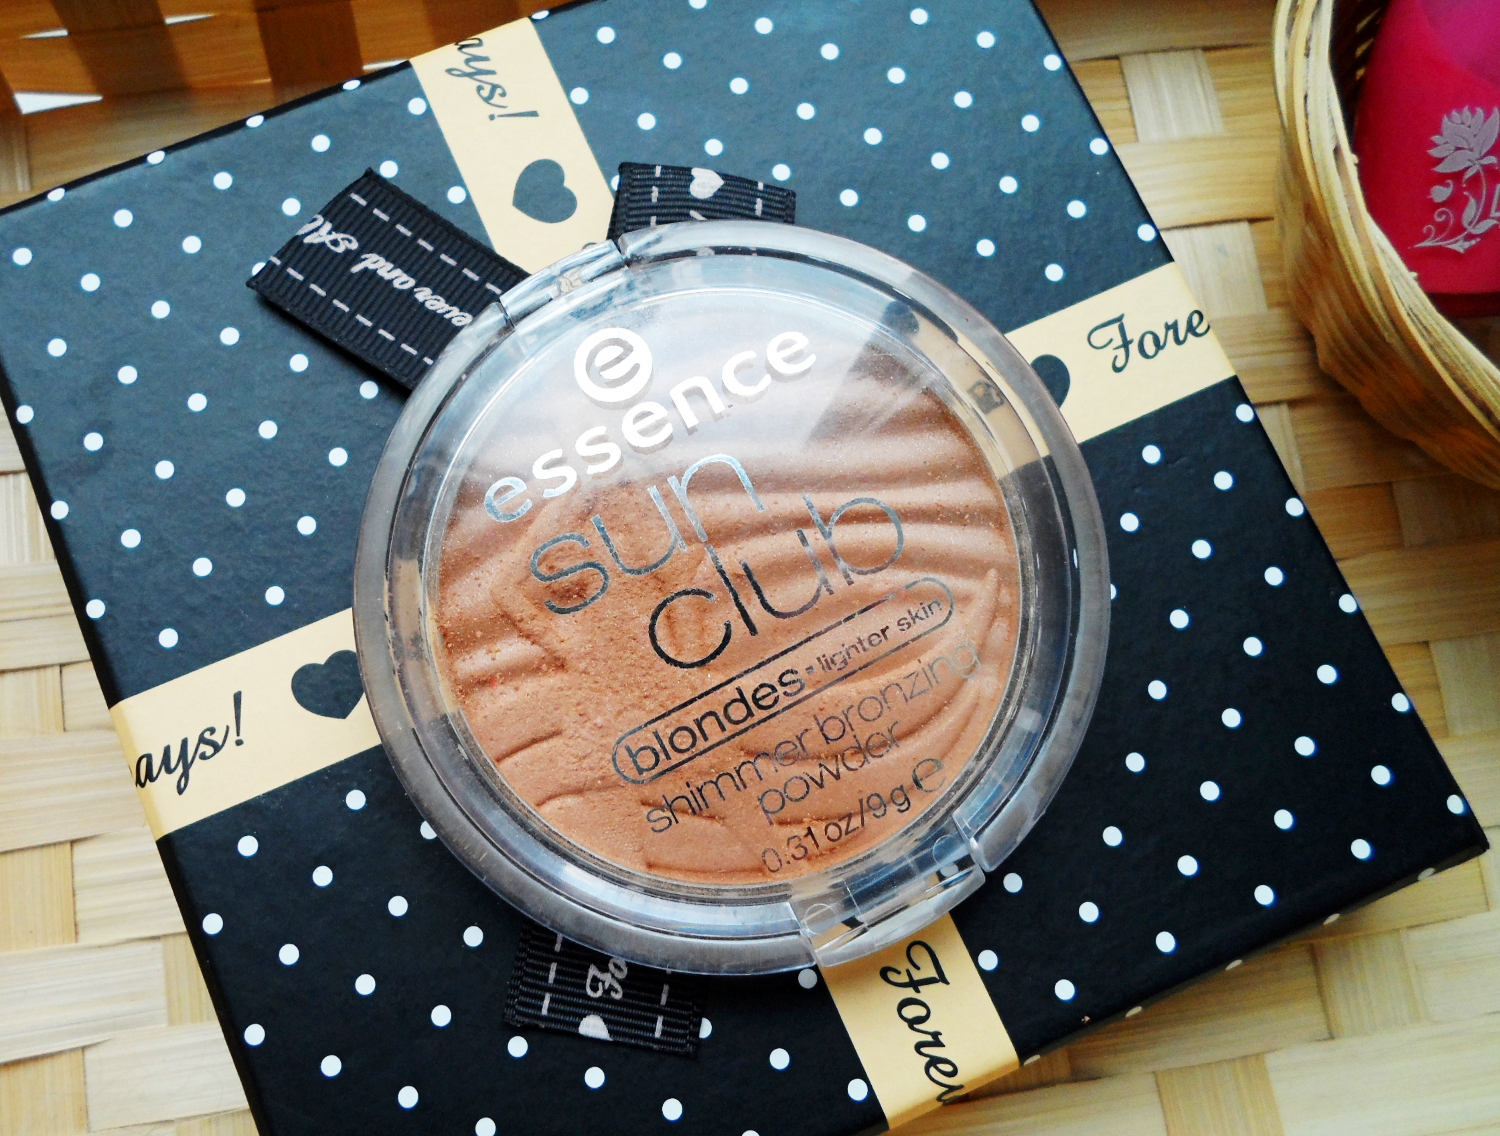 a close-up picture of bronzing makeup powder by essence